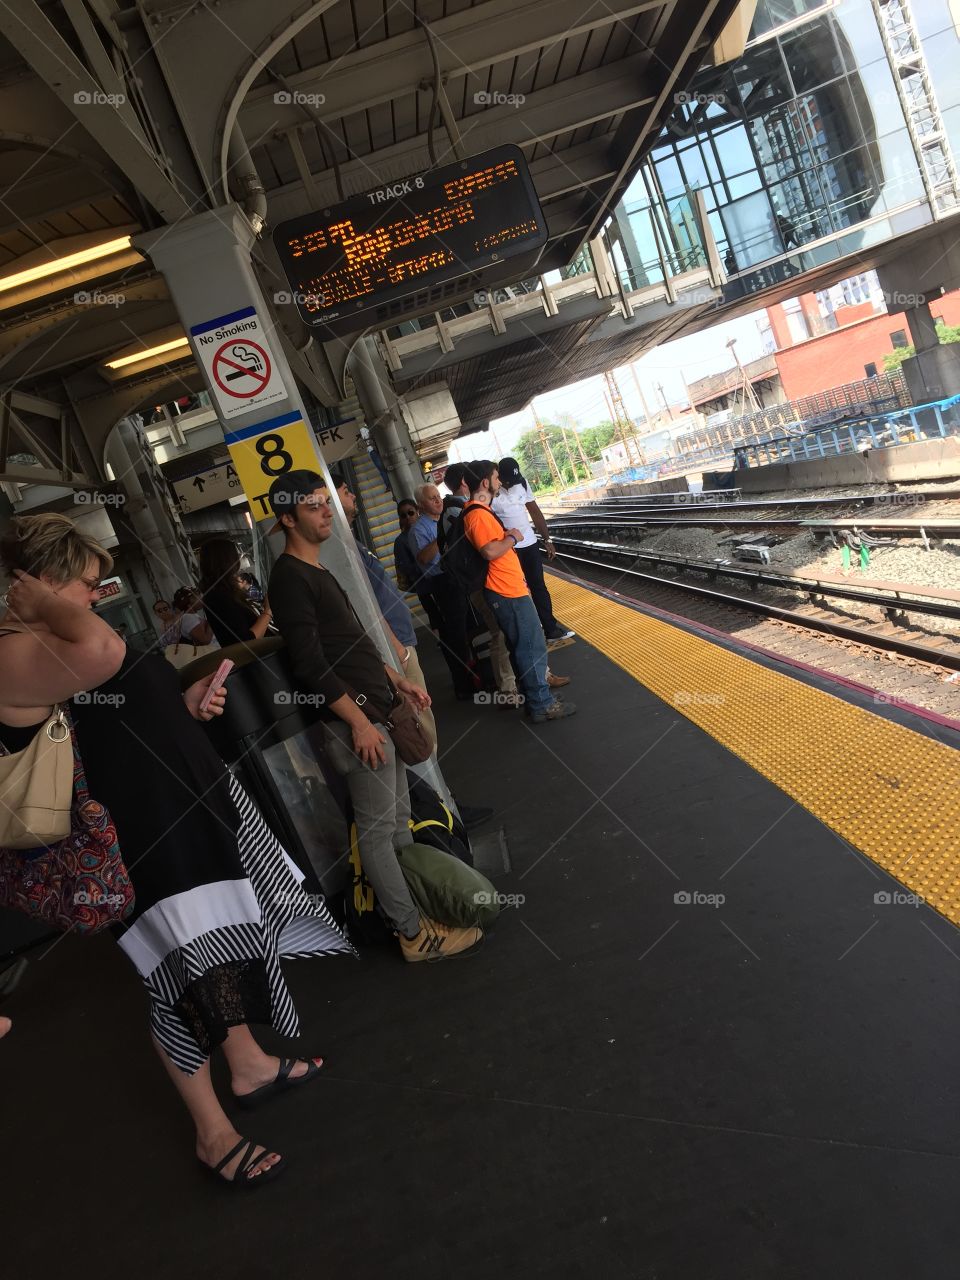 Waiting for the train, subway tracks with commuters, New York.